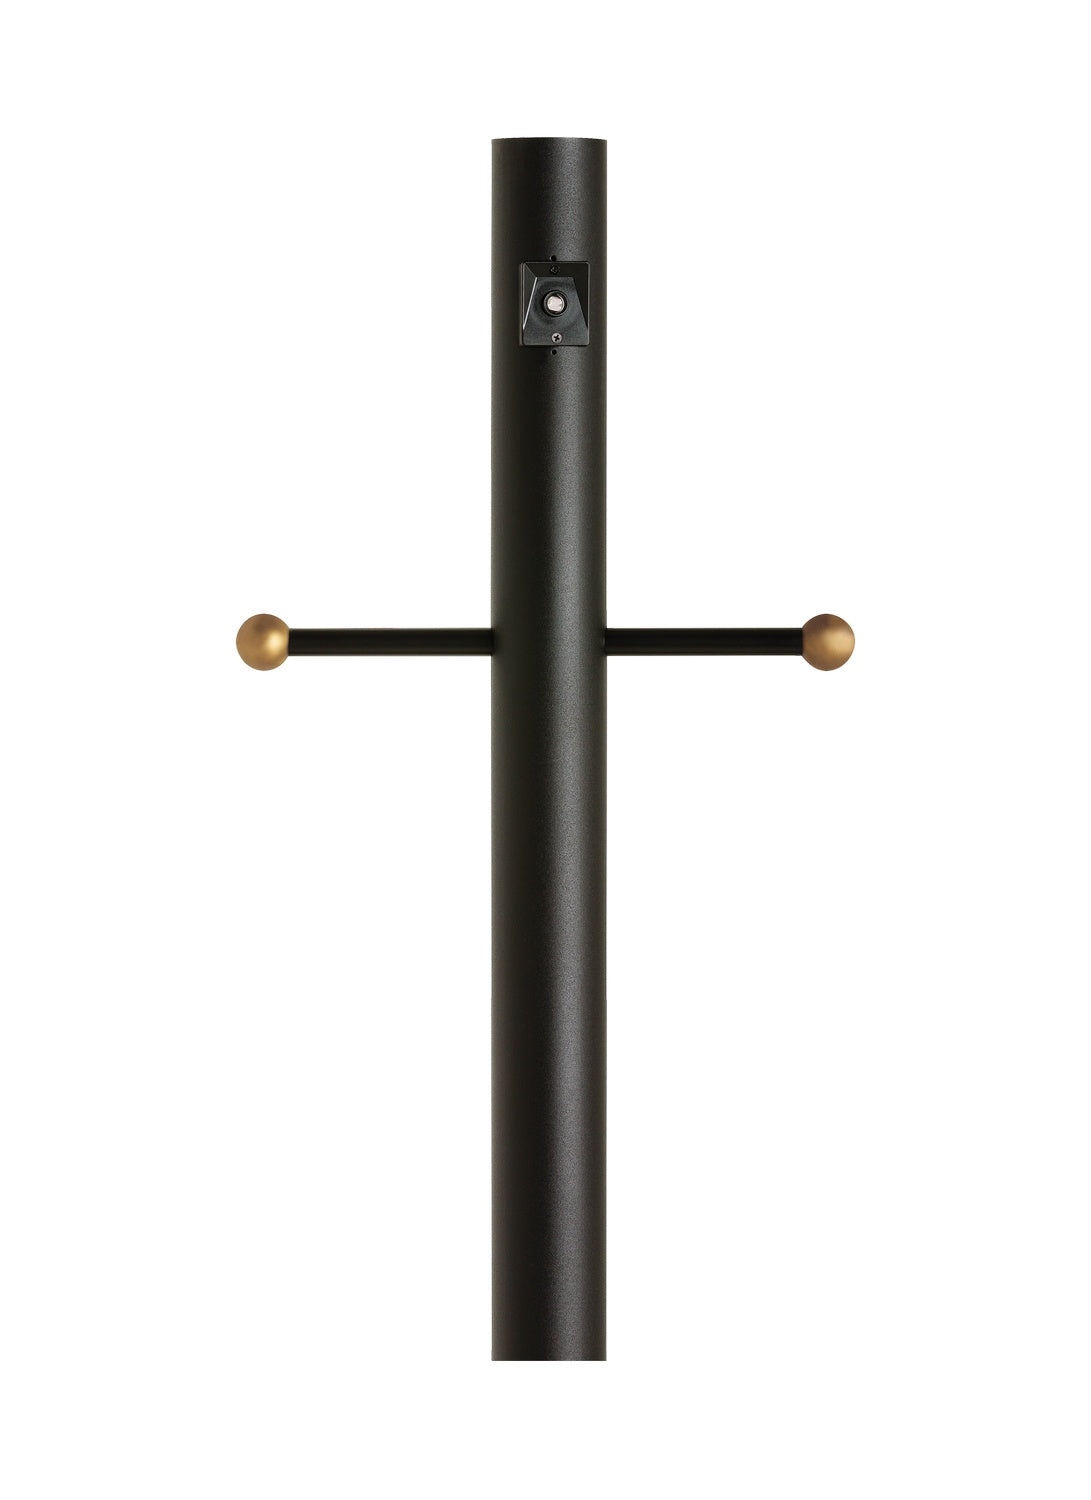 Generation Lighting Canada. - Post with Ladder Rest and Photo Cell - Outdoor Posts - Black- Union Lighting Luminaires Decor